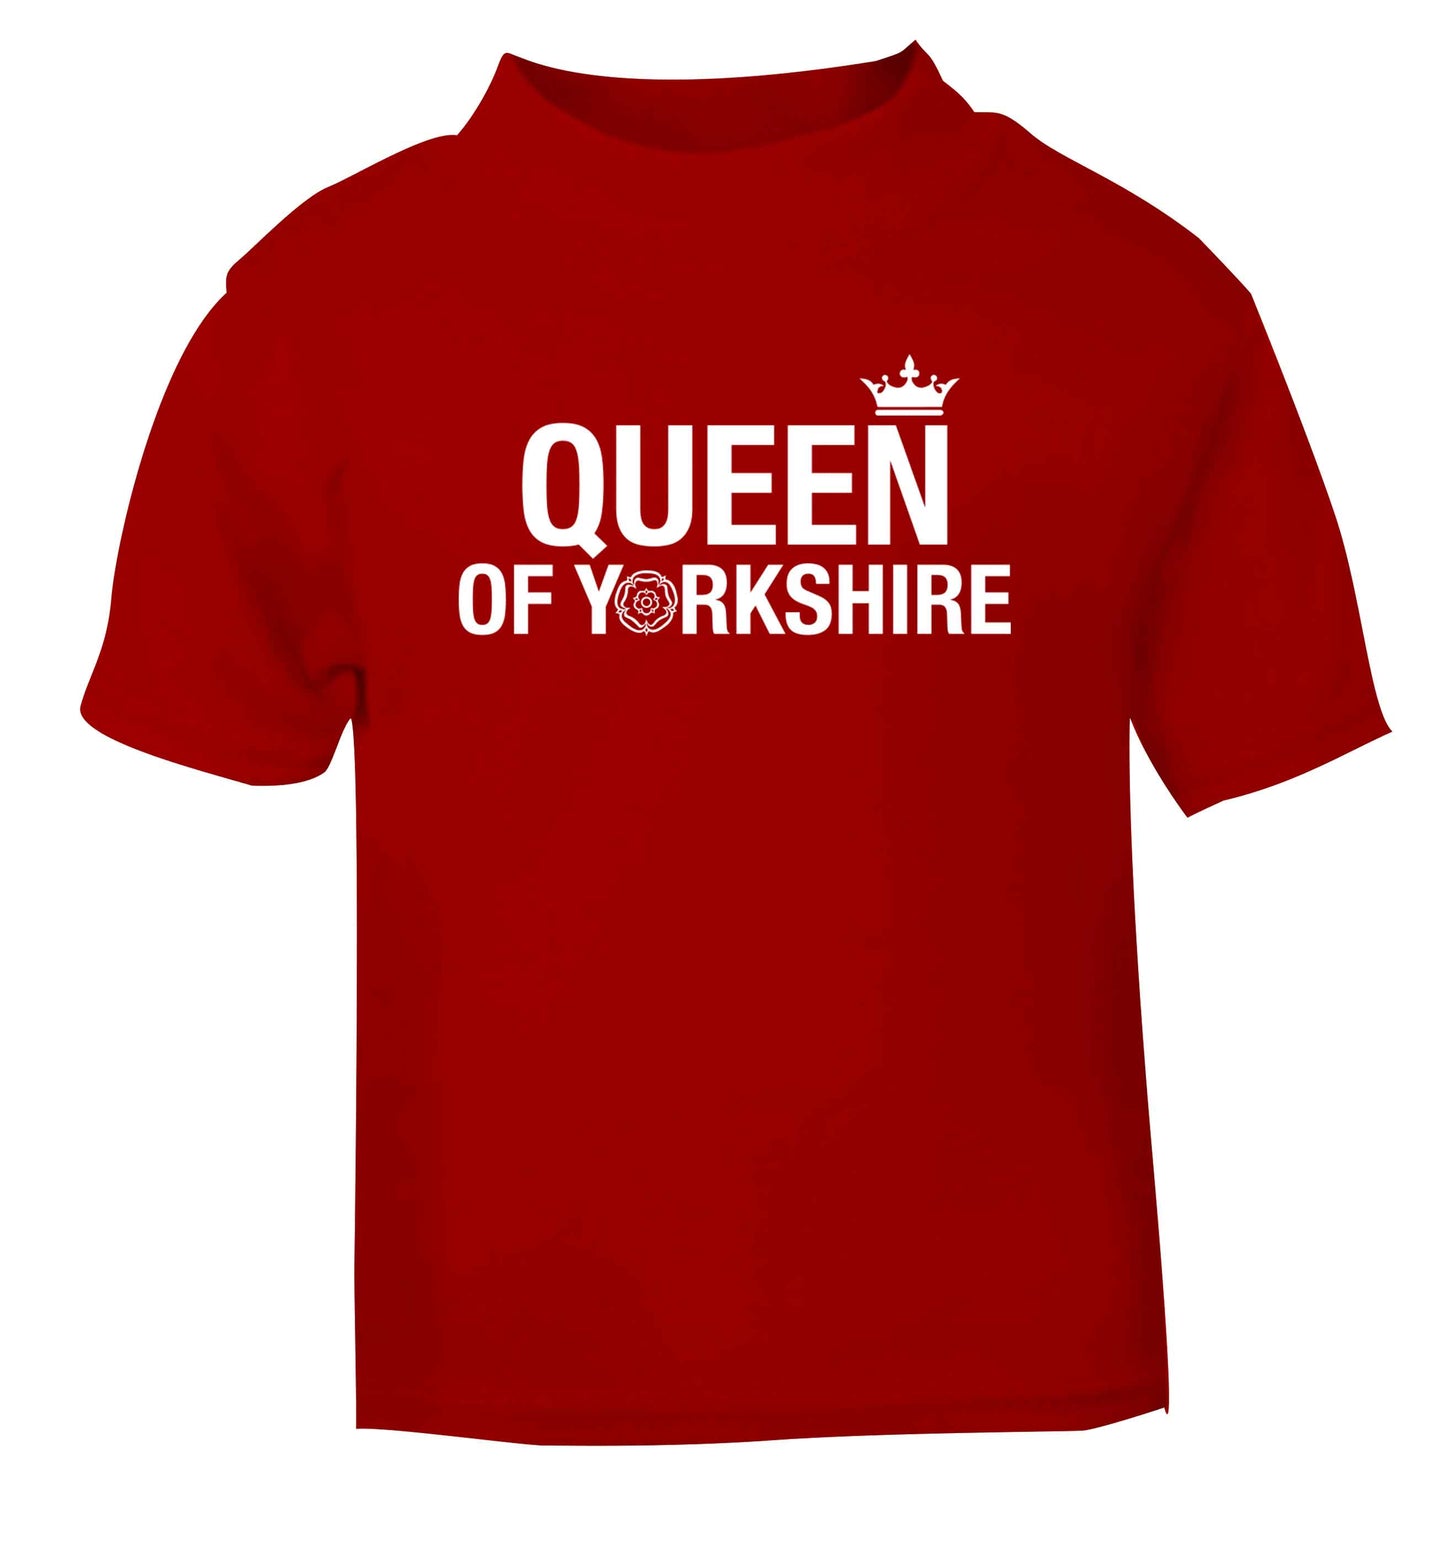 Queen of Yorkshire red Baby Toddler Tshirt 2 Years